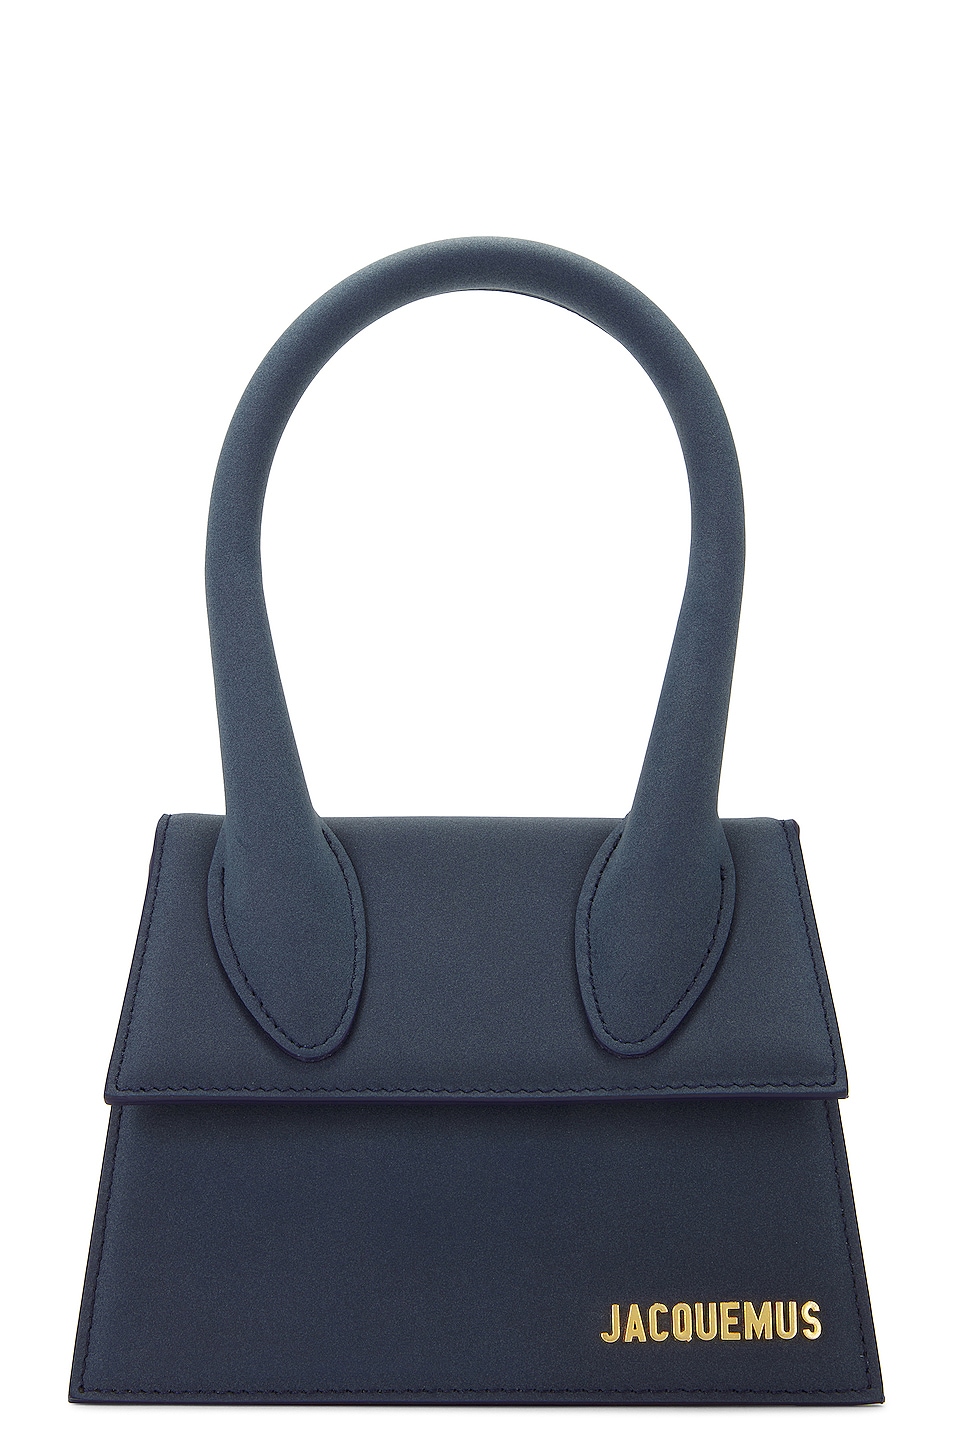 Le Chiquito Moyen Bag in Navy